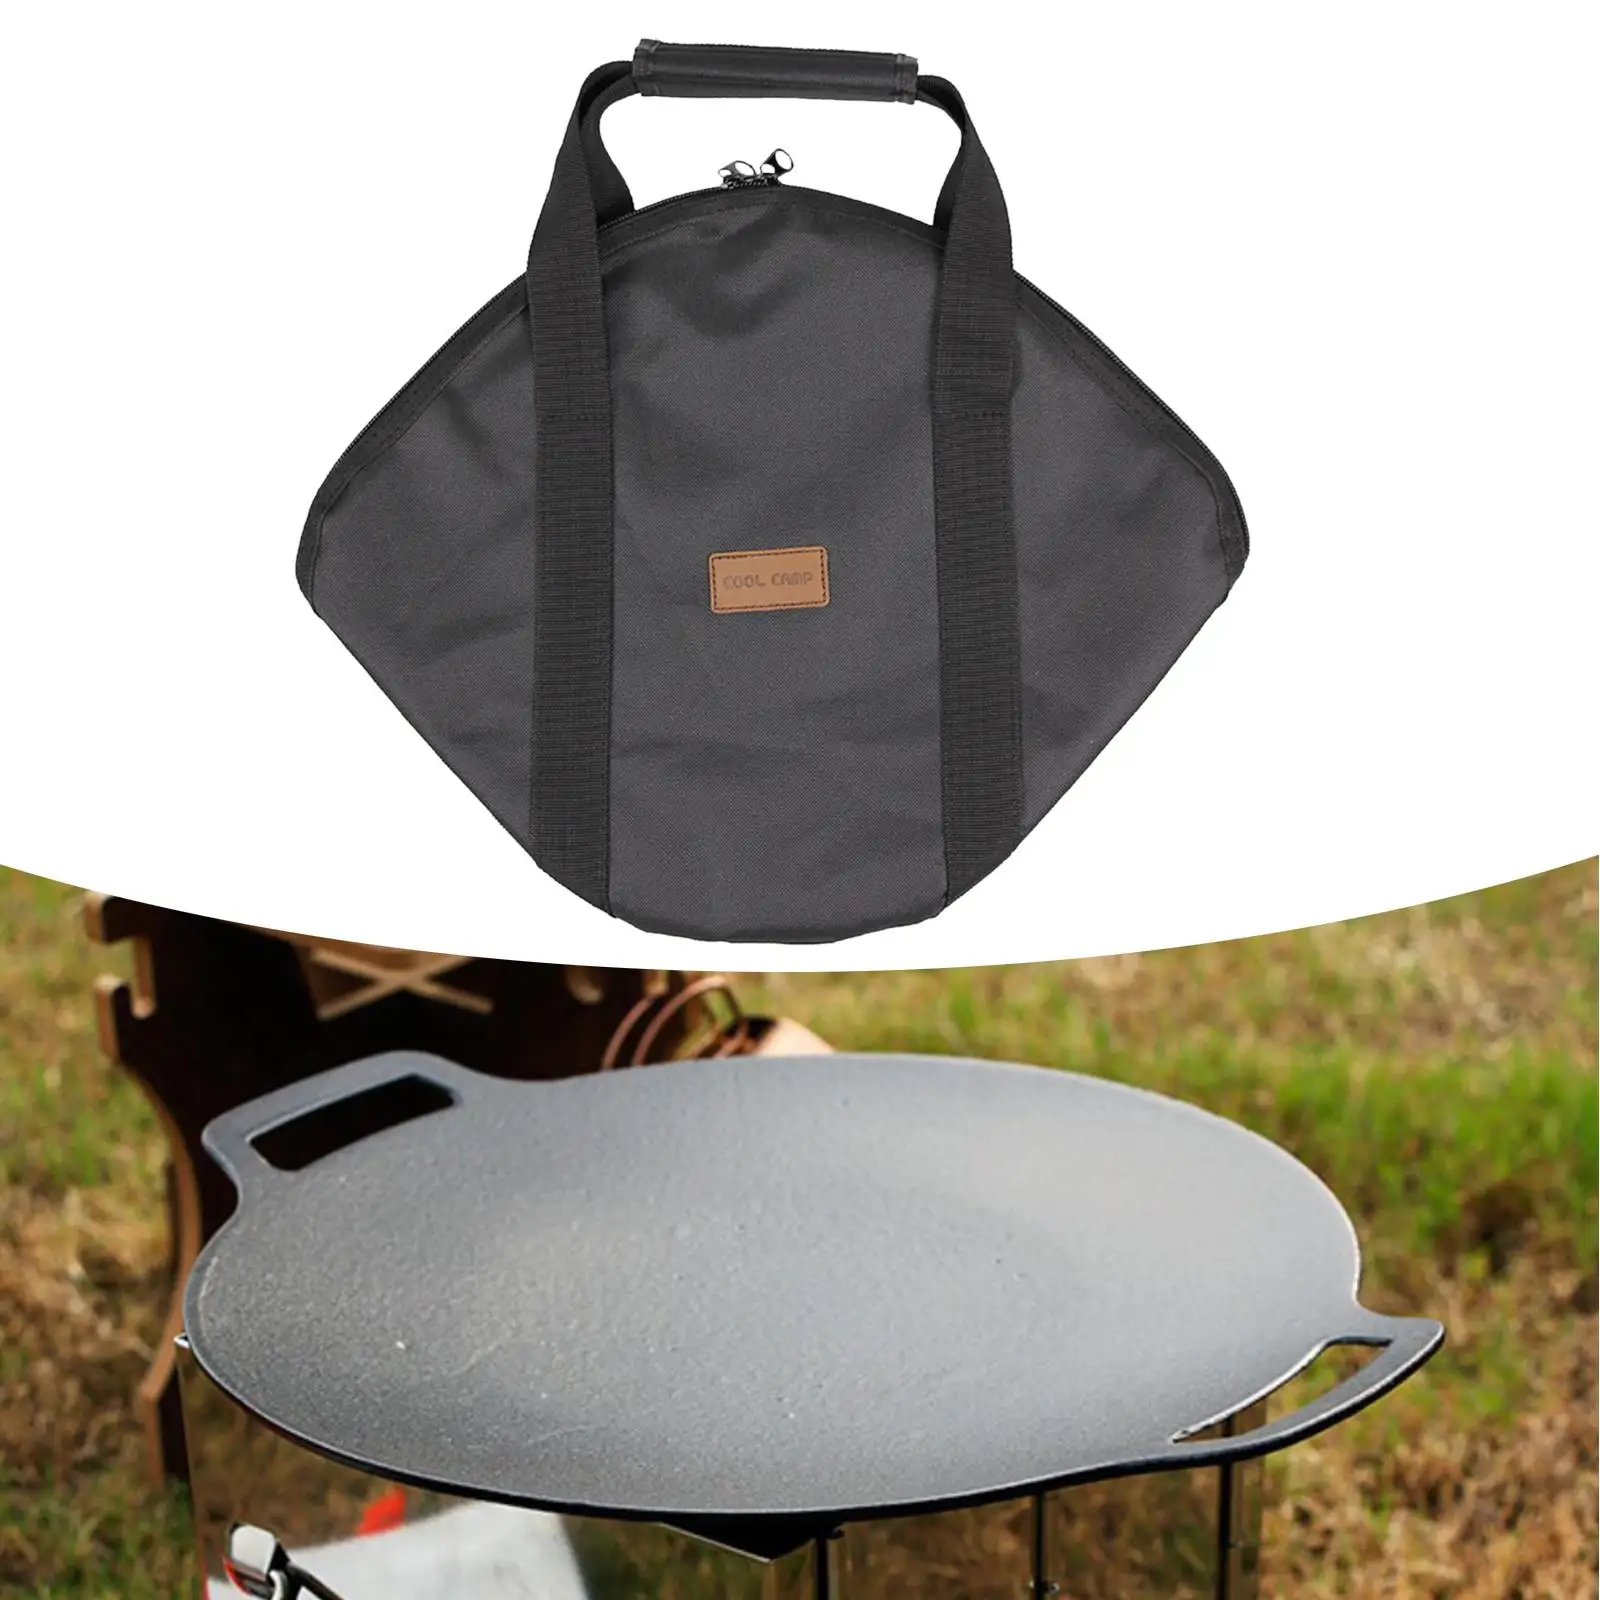 Stovetop Barbecue Grill Pan Bag Barbecue Plate Cooking Meat Frying Pan